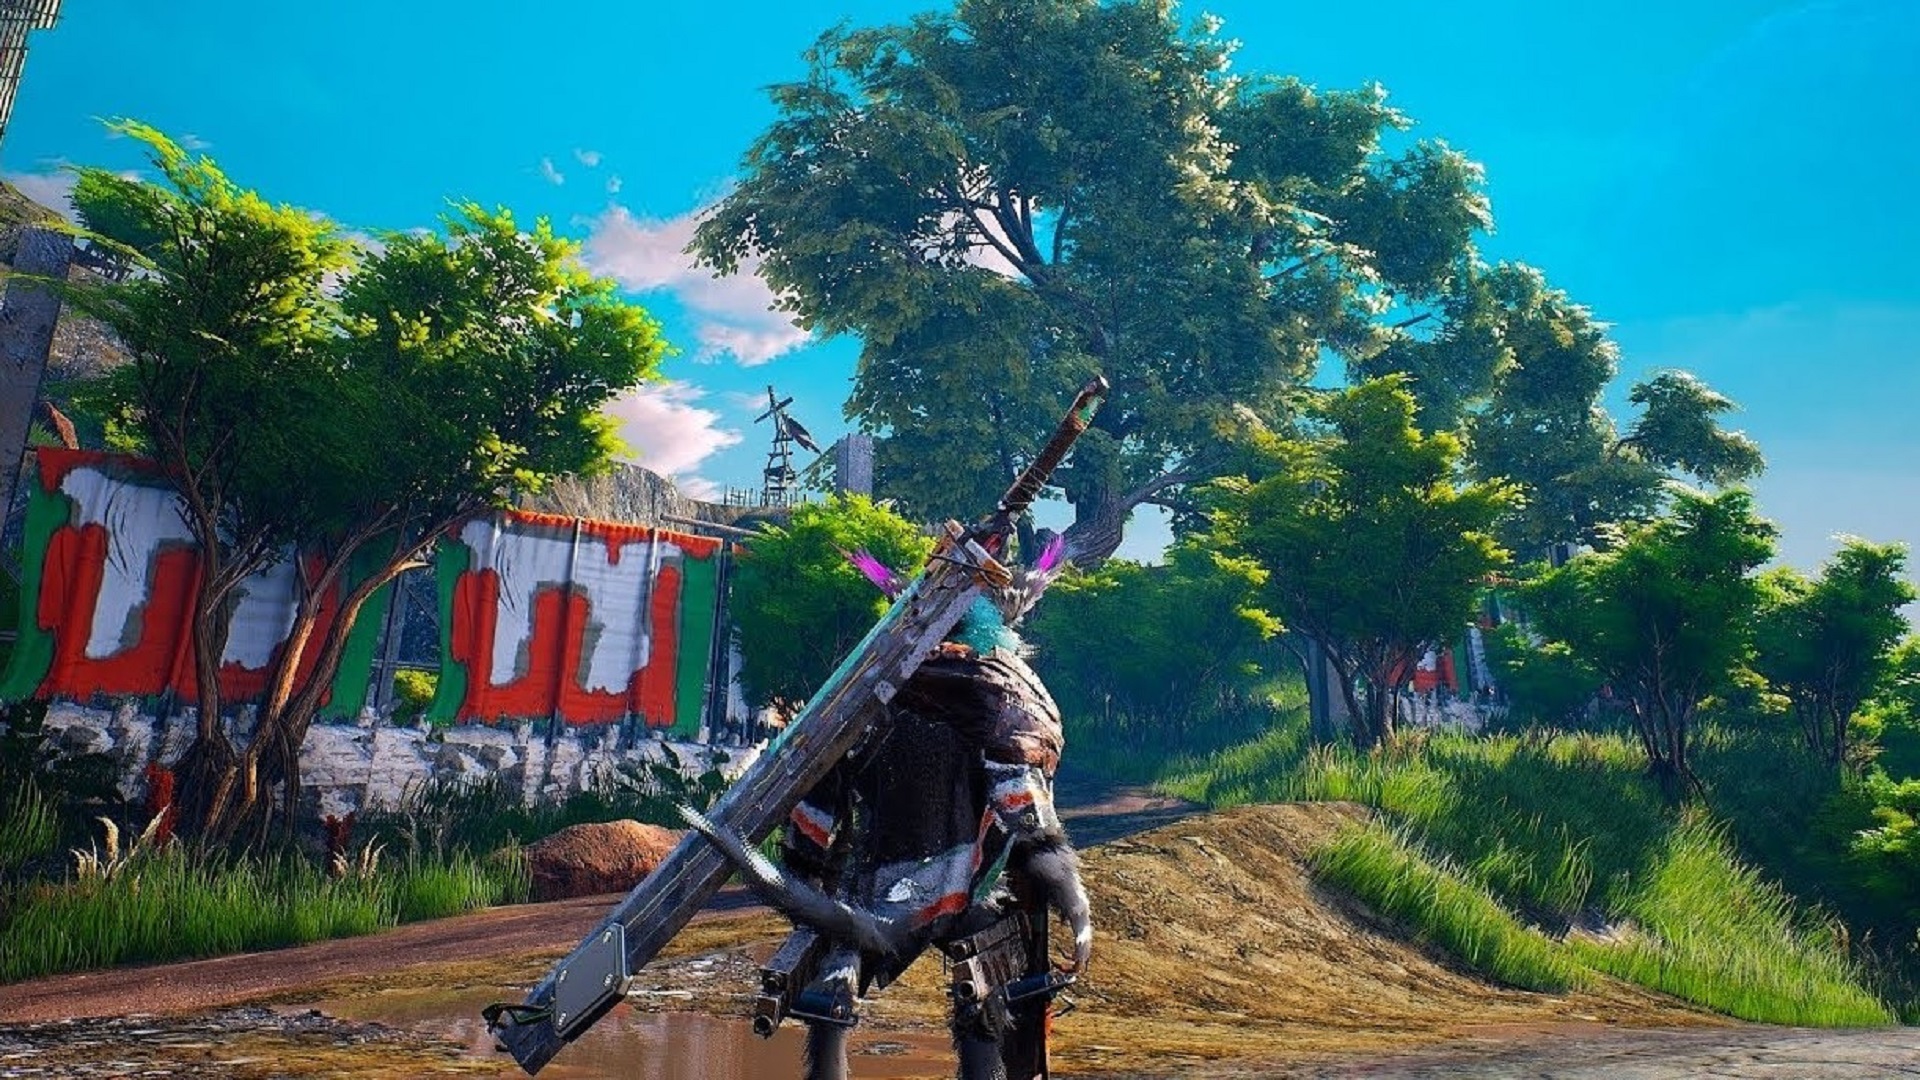 will biomutant be on ps5